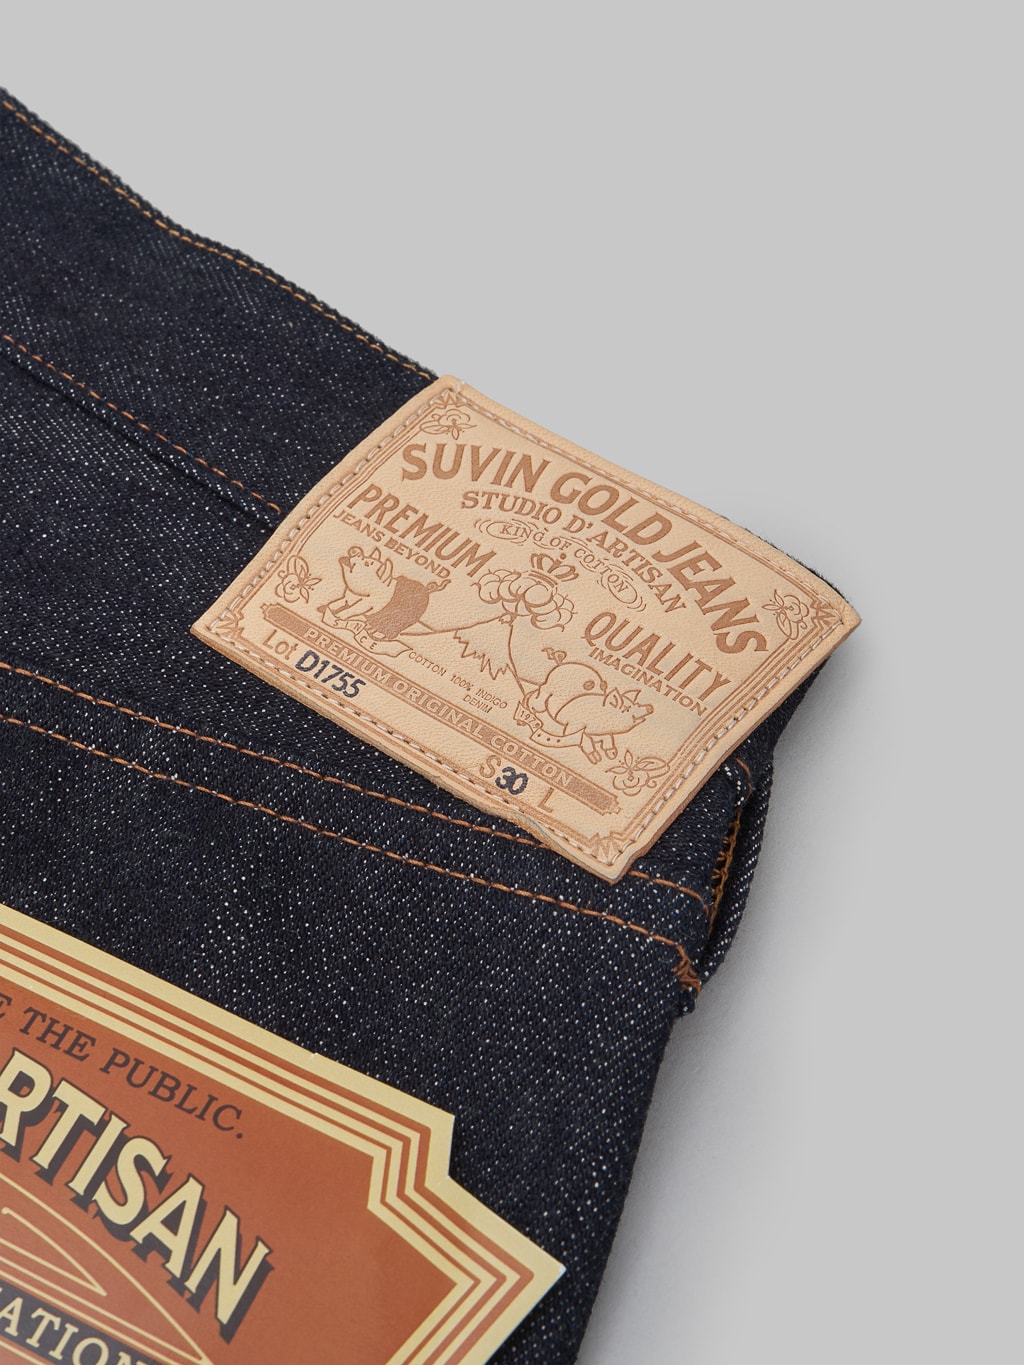 Studio DArtisan Suvin Gold D1755 Regular Straight Narrow Jeans leather patch